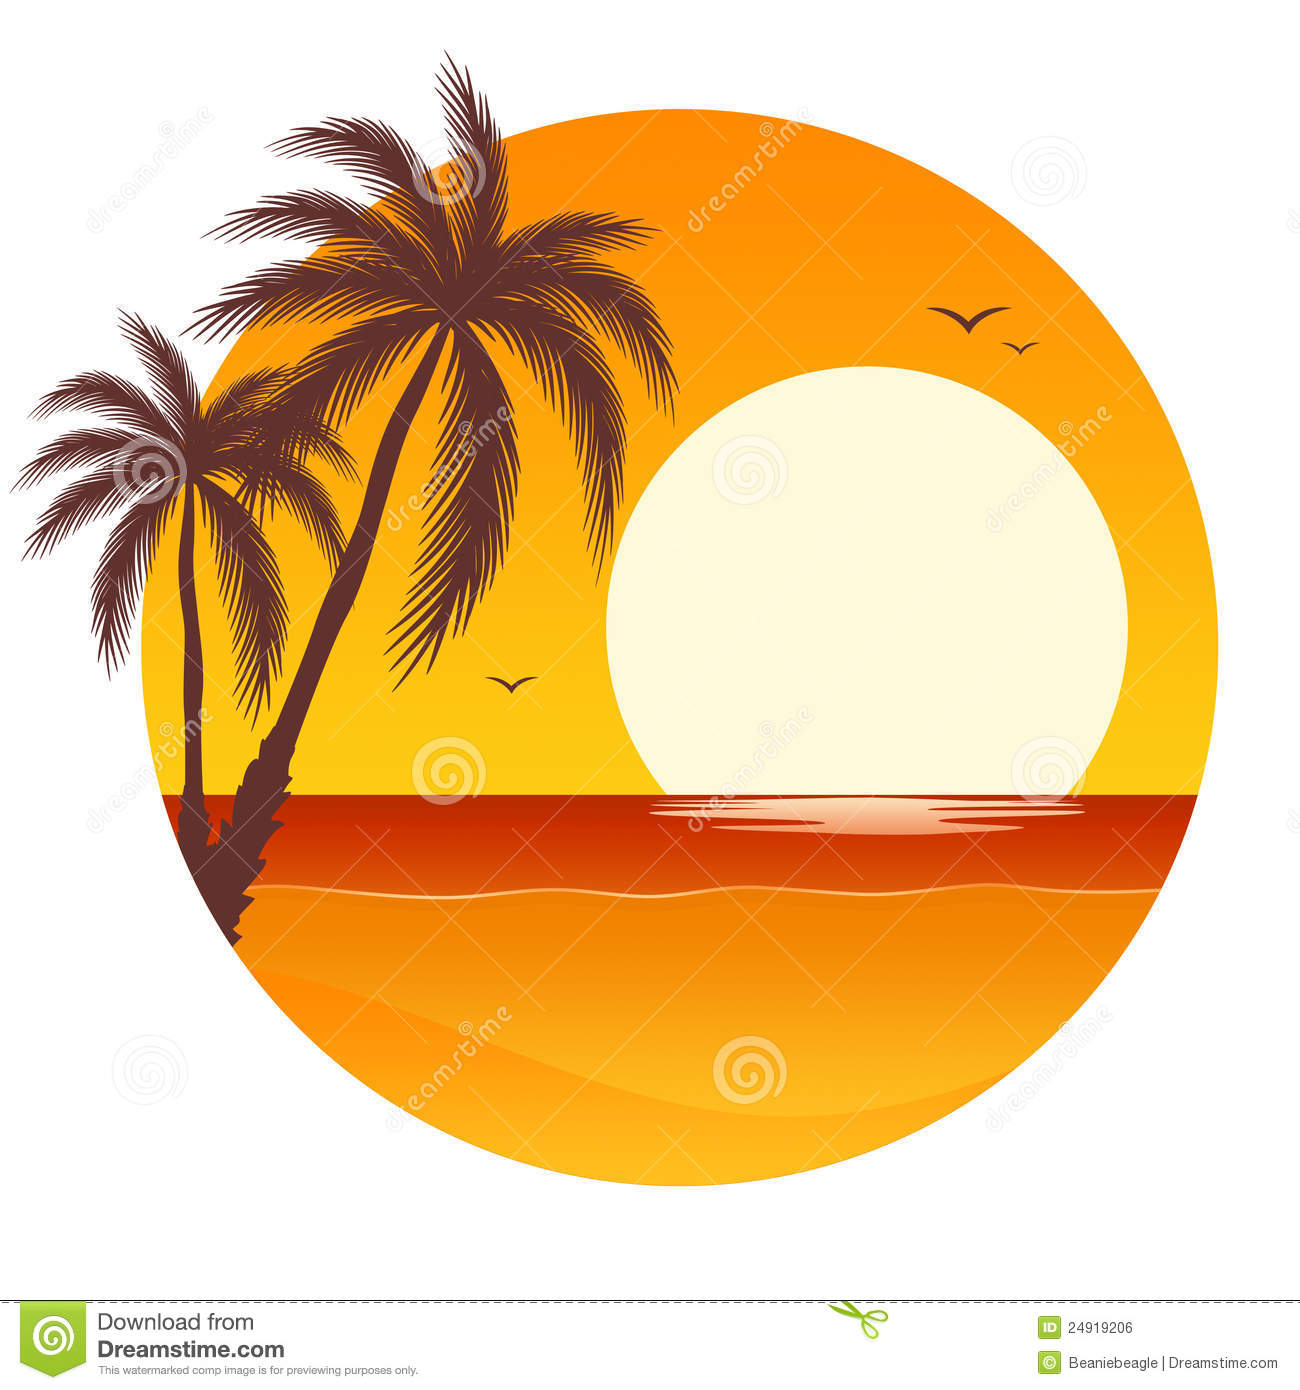 Sunset clipart #7, Download drawings